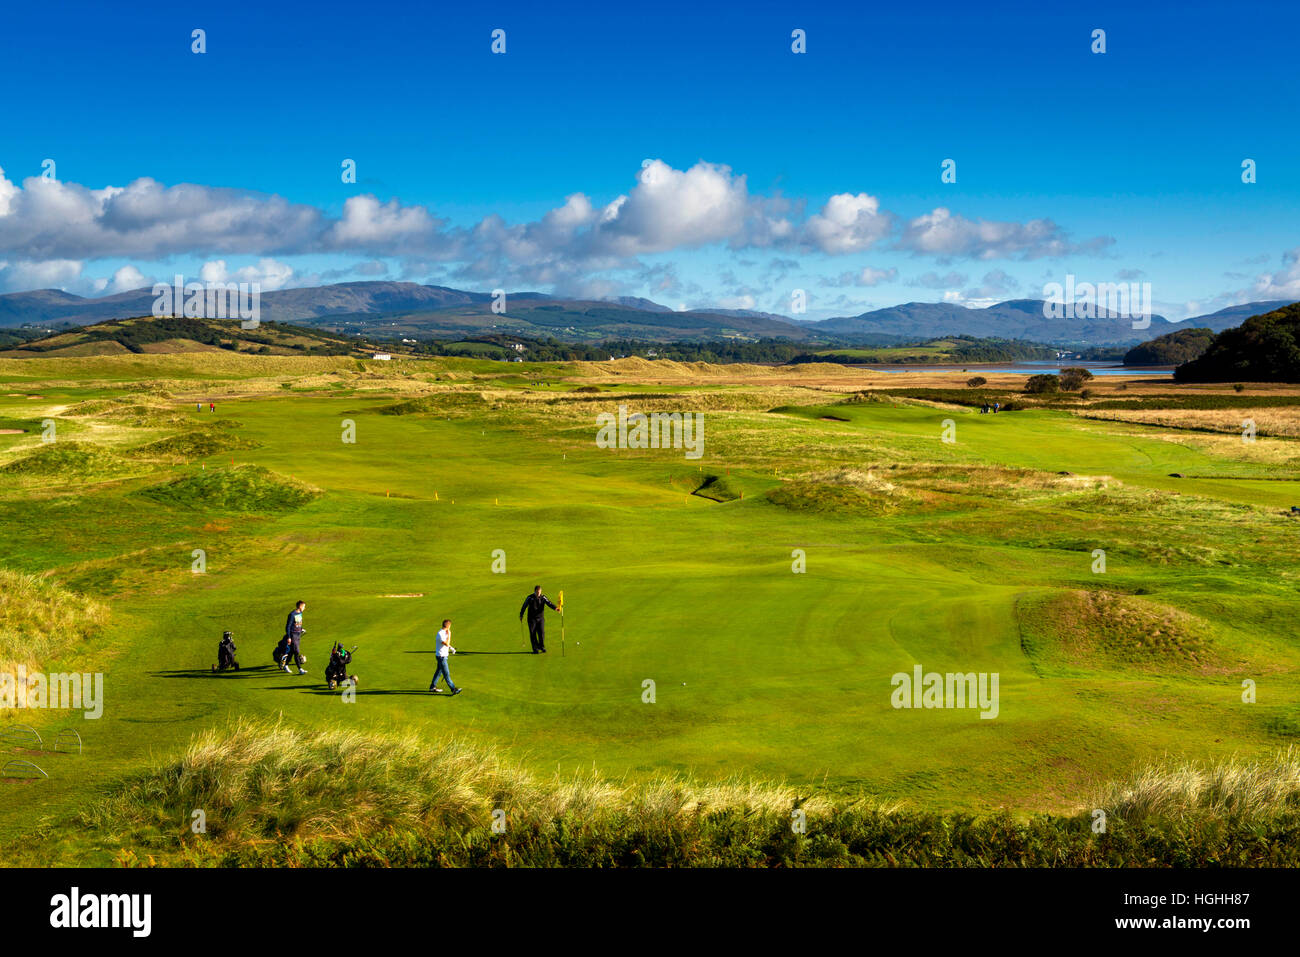 Donegal Golf Club Mervagh Blue stack mountains Co. Donegal Ireland Stock Photo